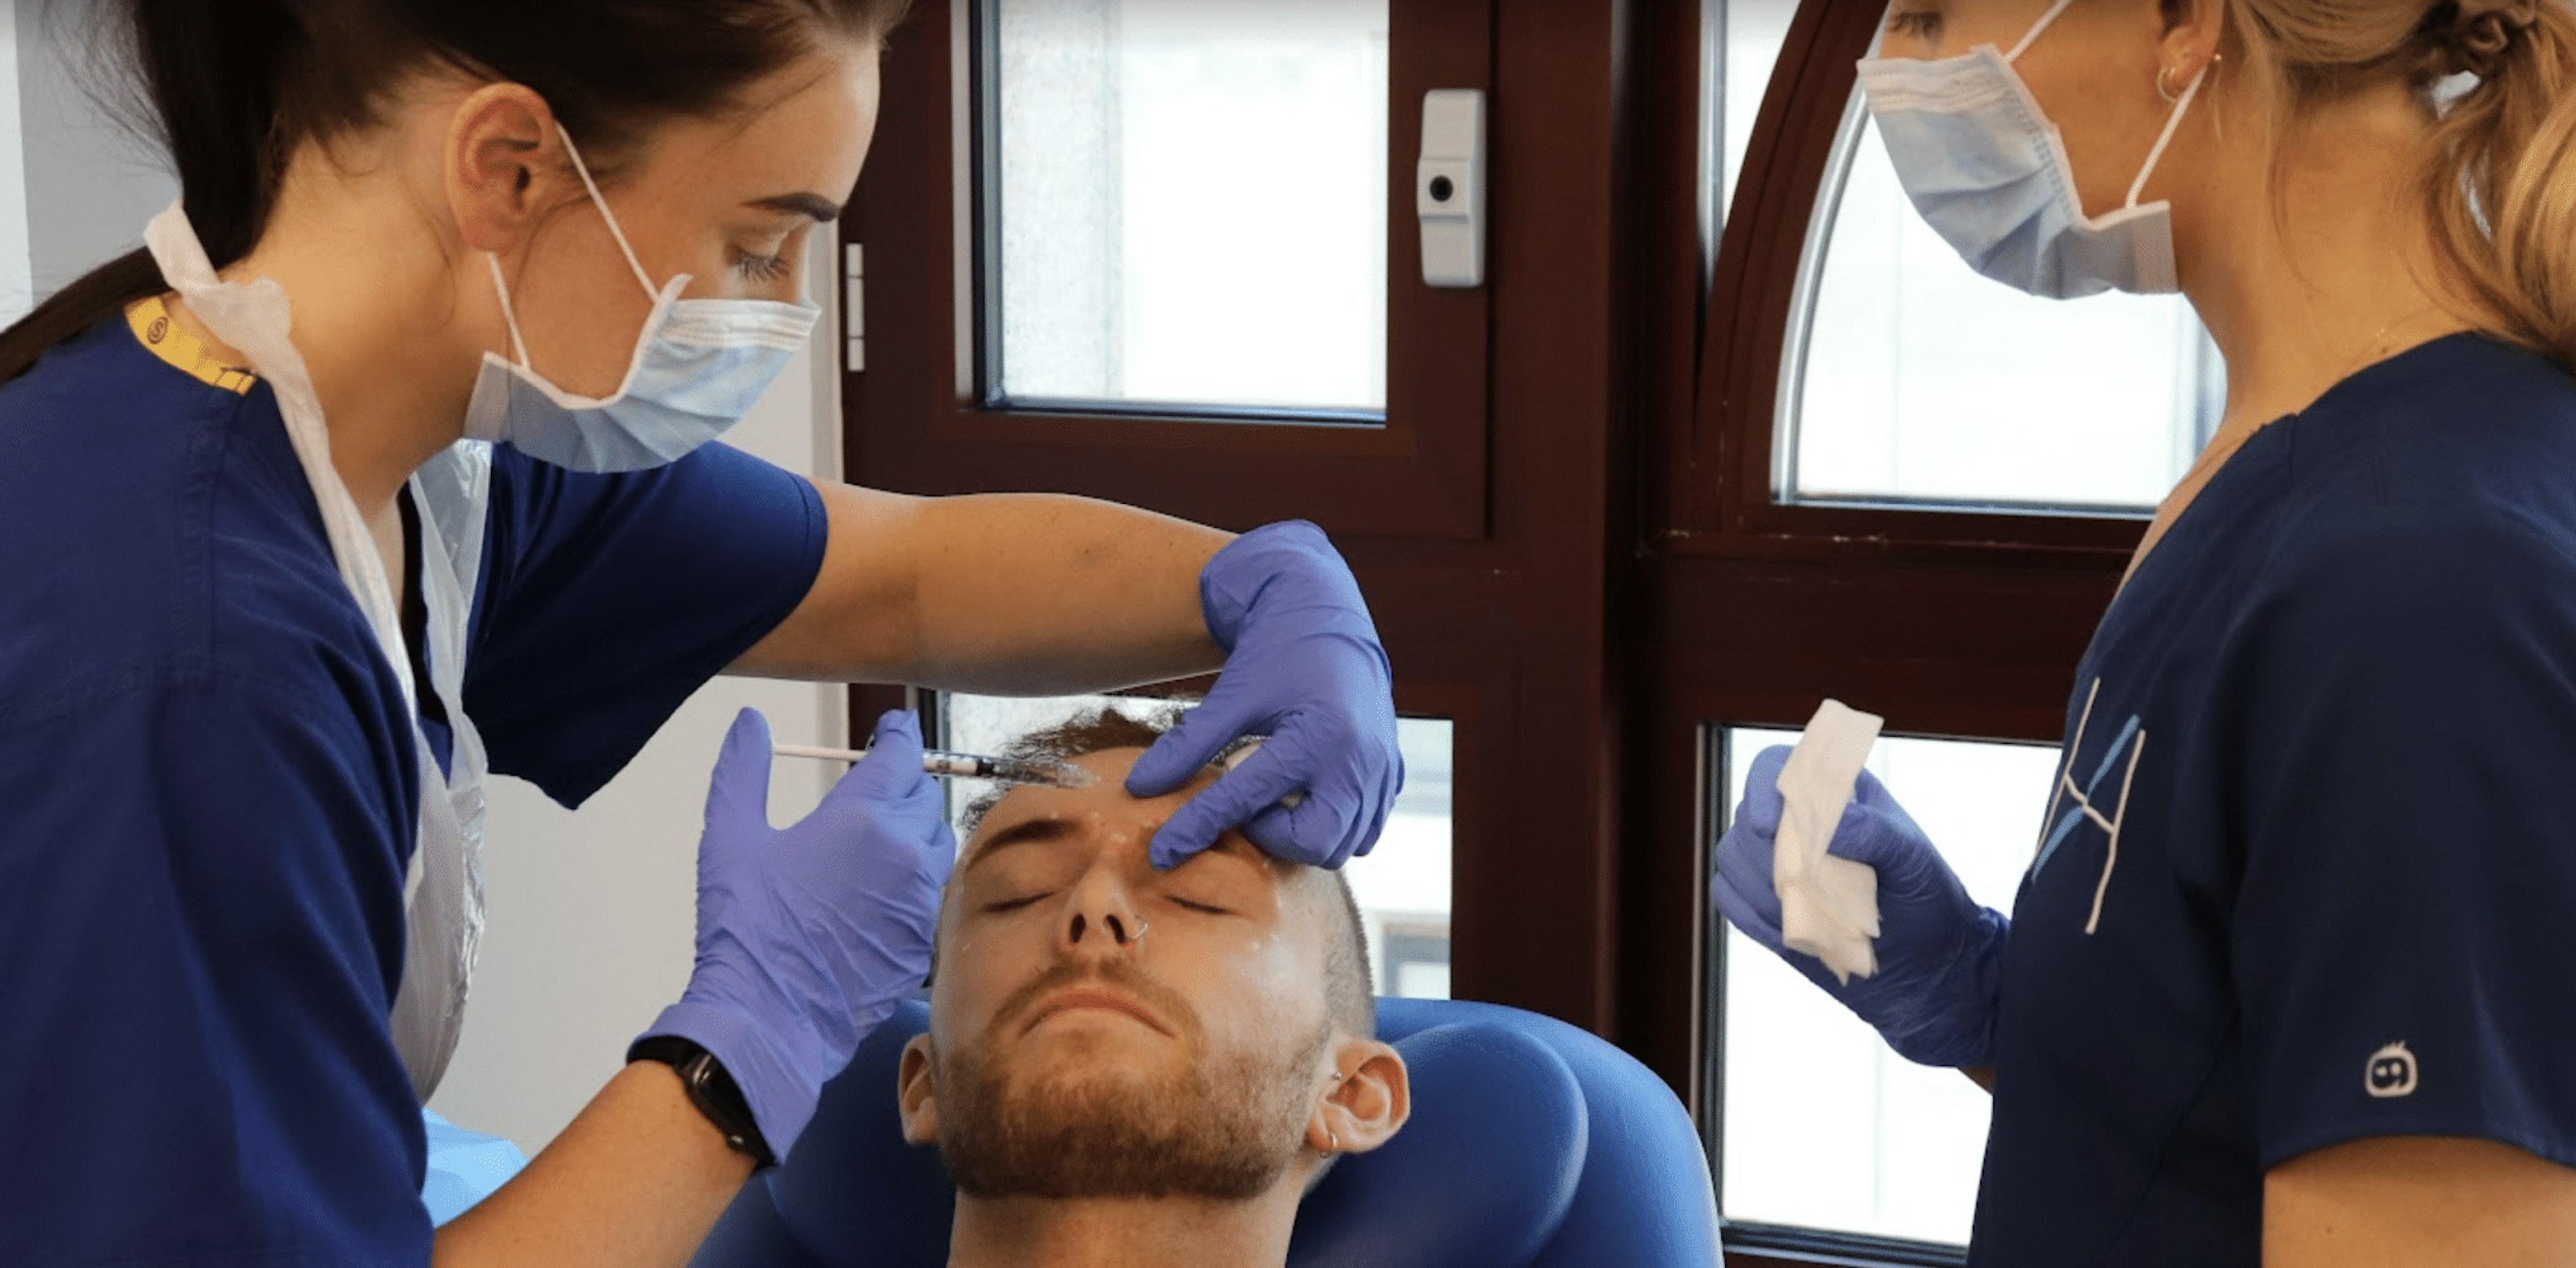 A male patient receiving botox injectors into the forehead area